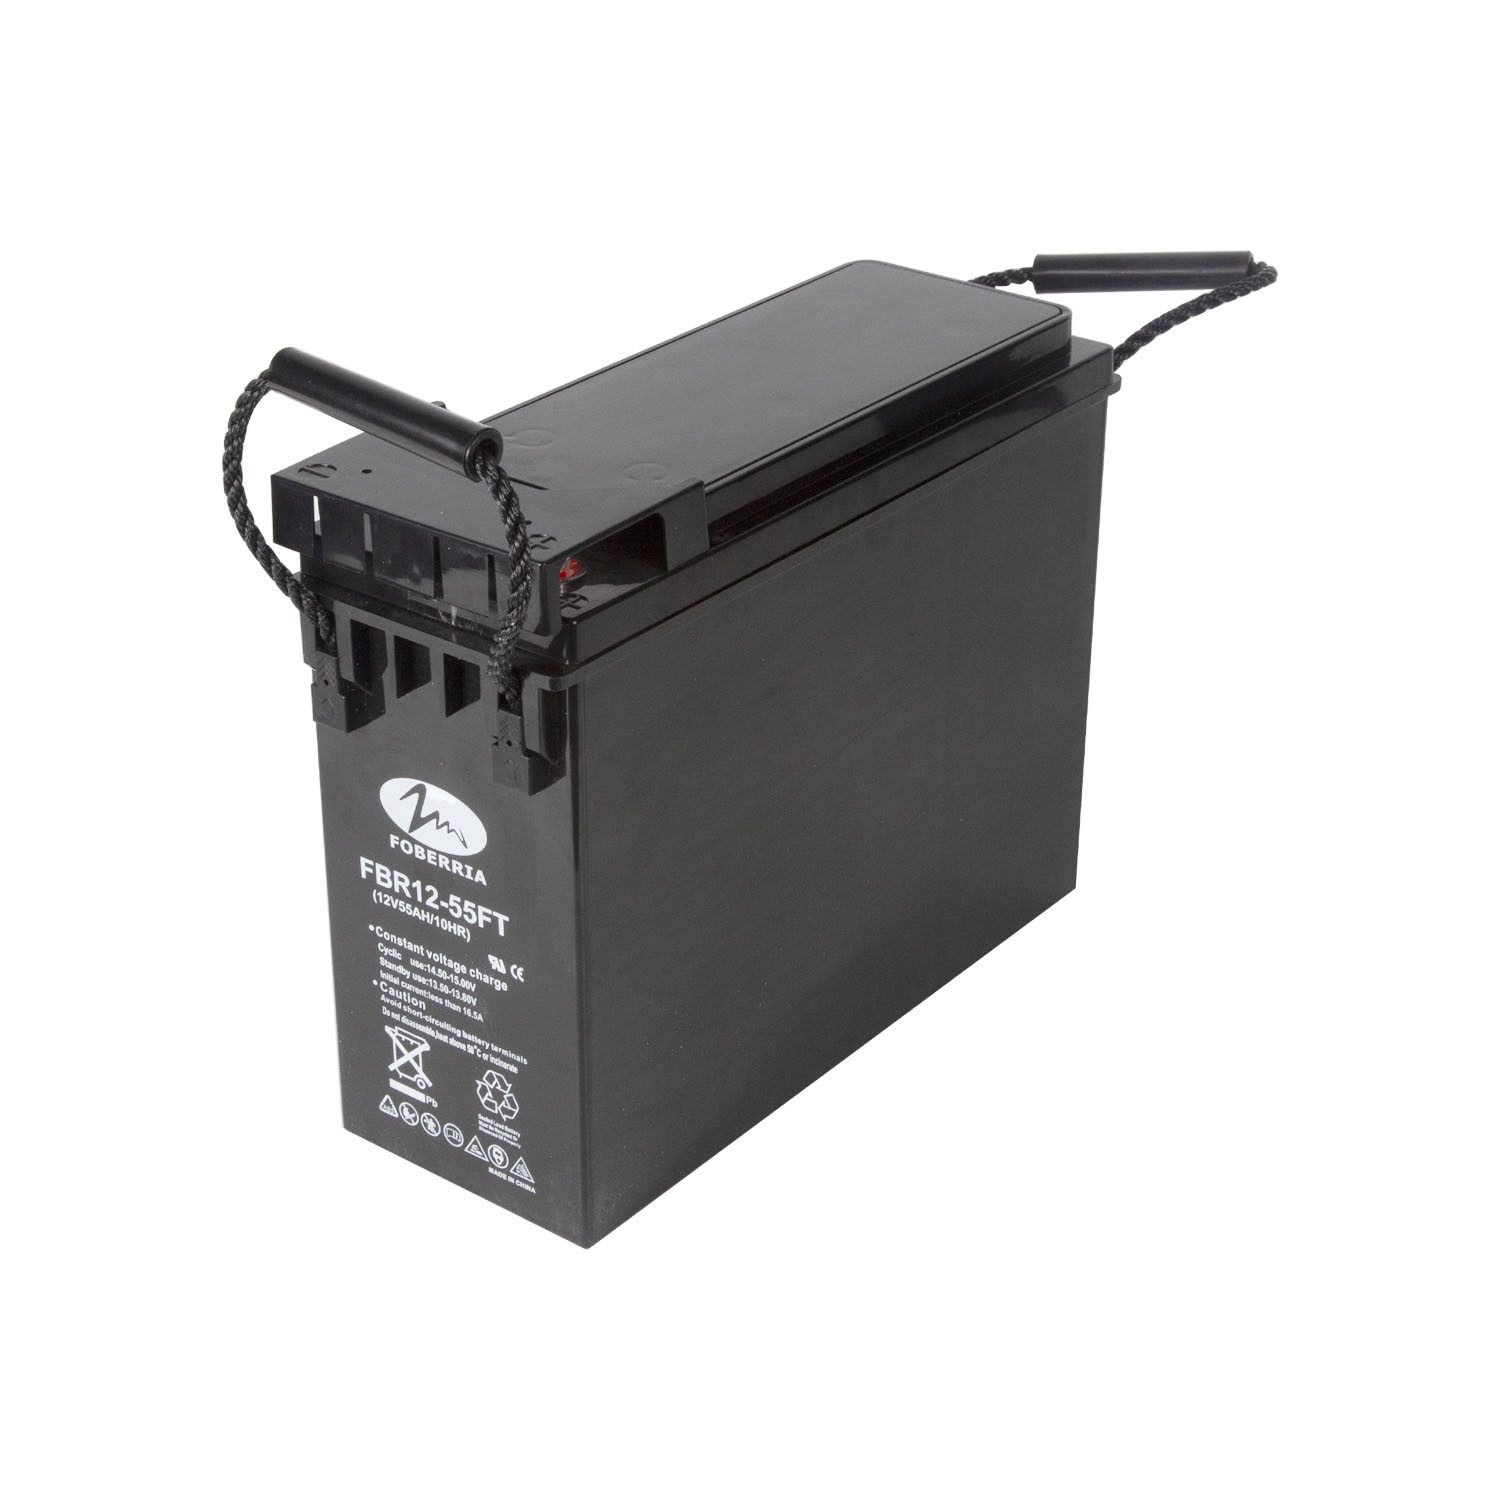 12V 55ah Deep Cycle Battery Front Terminal Battery For Telecom